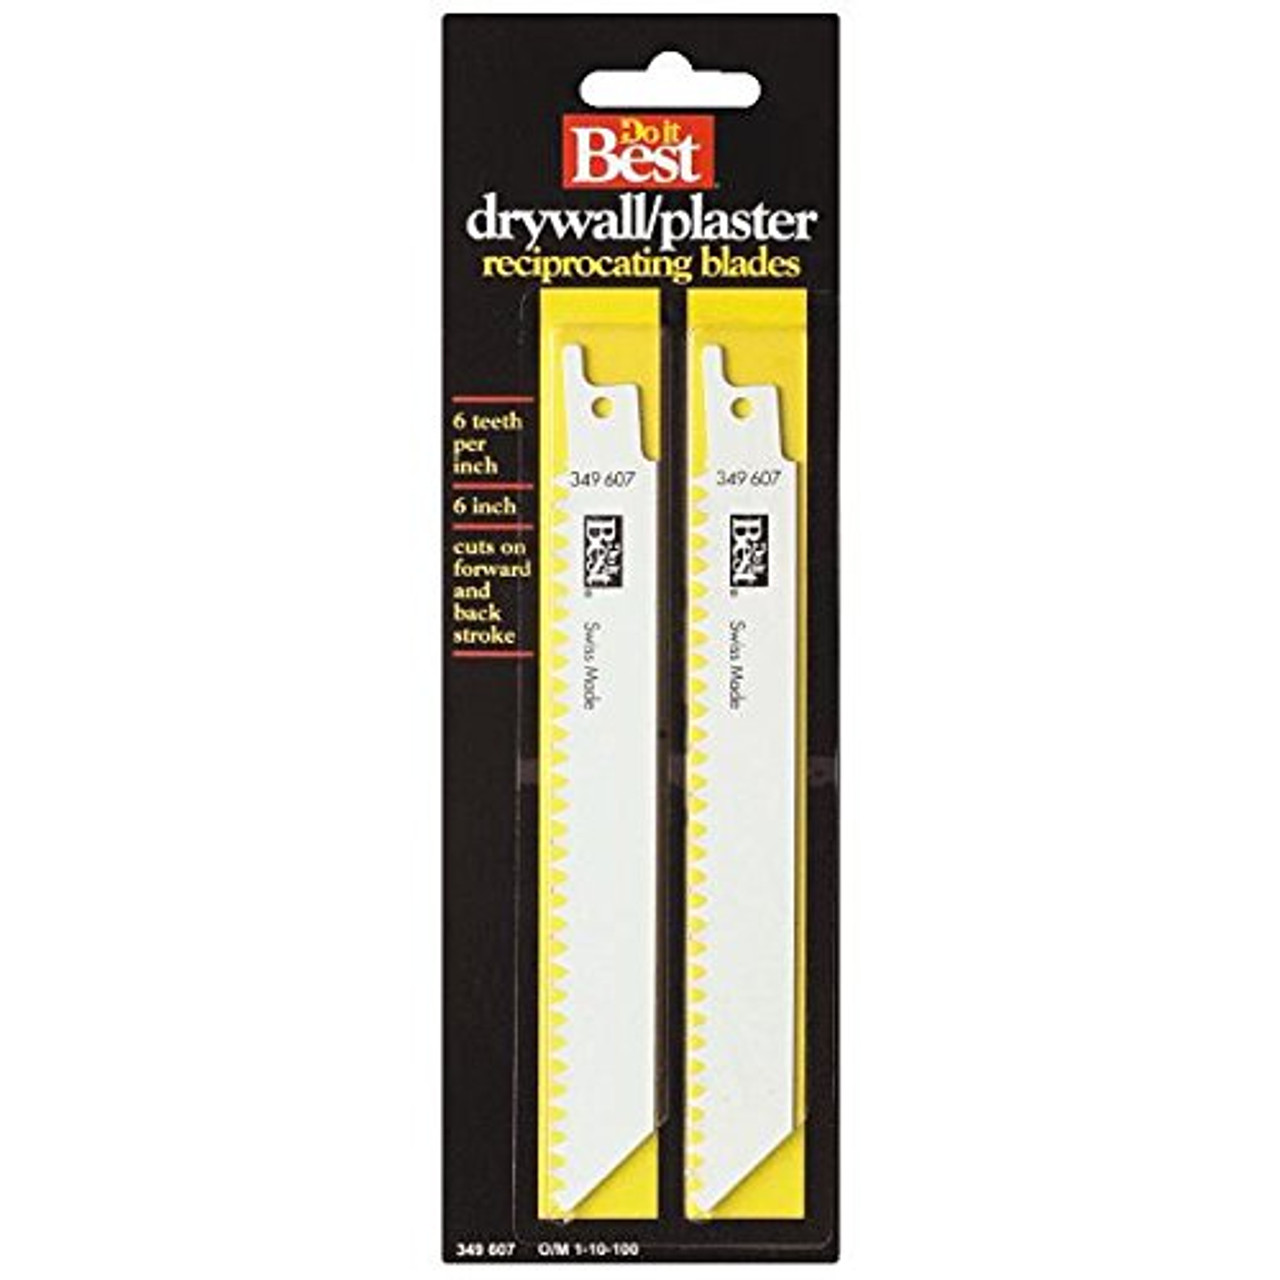 Do it Best Drywall And Plaster Carbon Steel Reciprocating Saw Blade 6" 6 TPI 2 PK